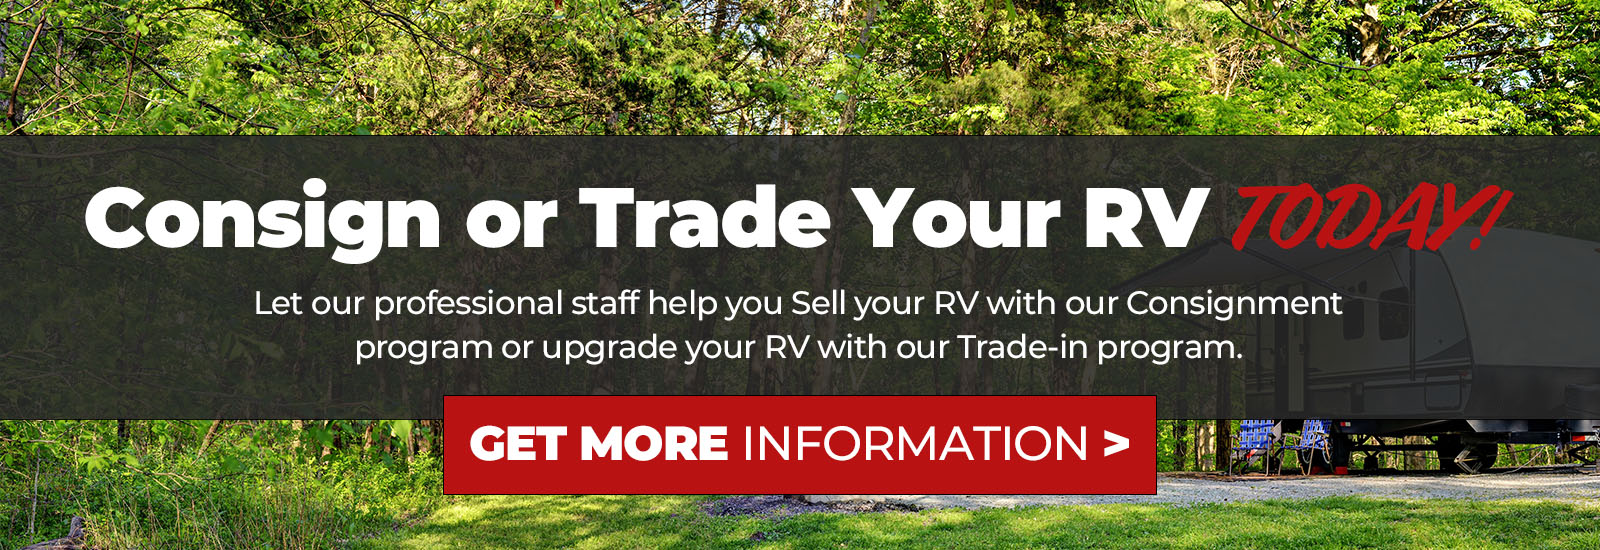 Looking to sell or consign your RV?